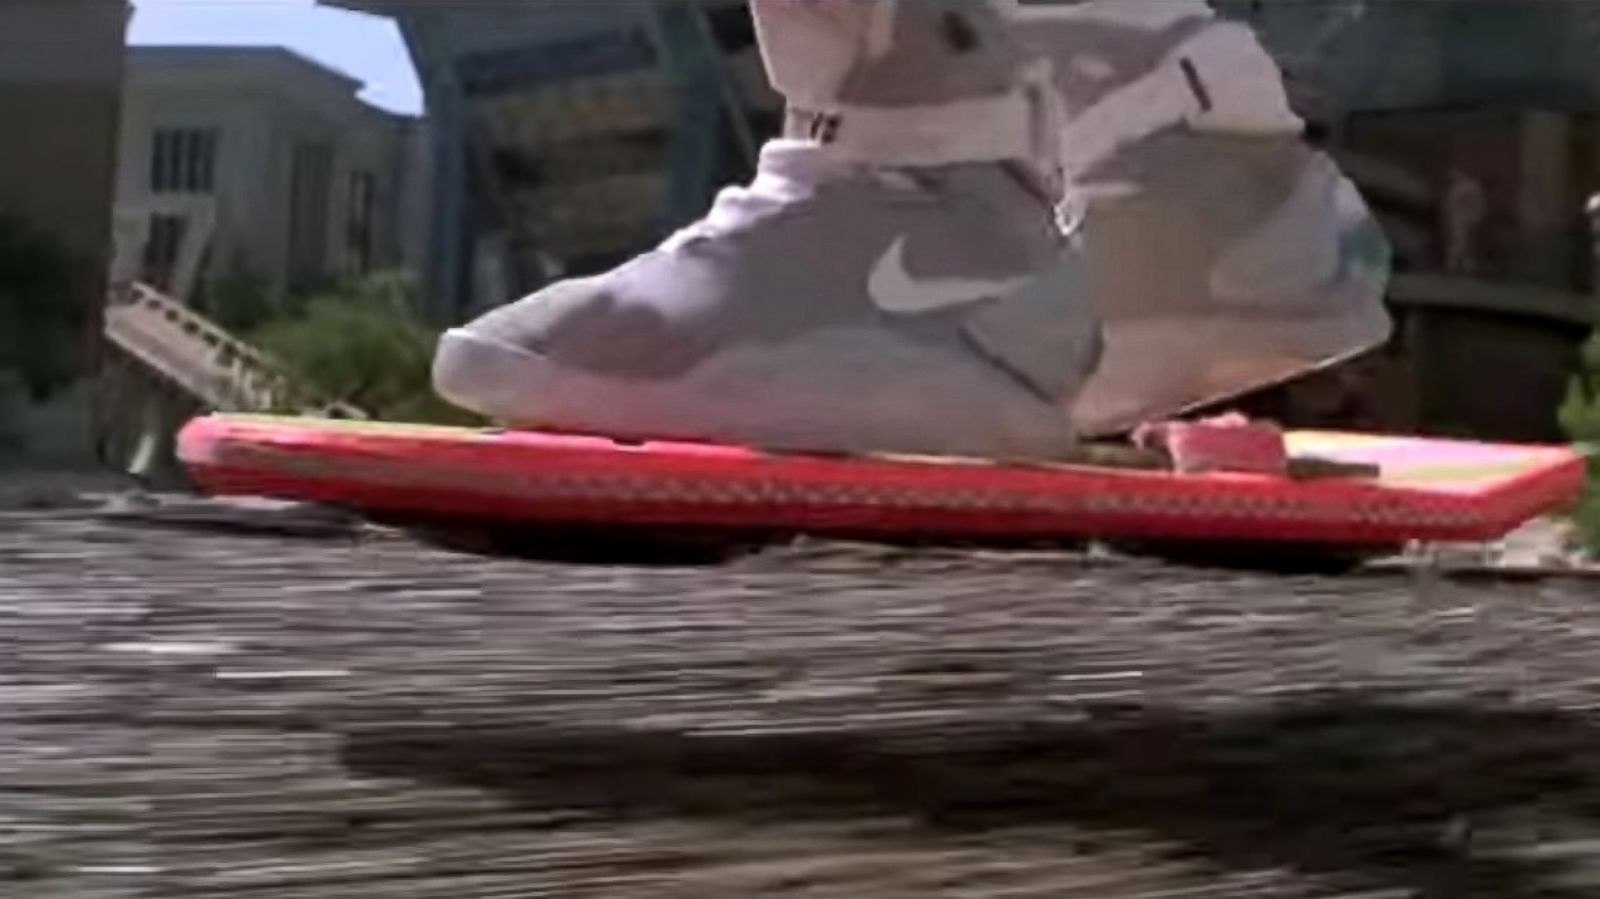 Back to the Future' Today? Inventor Raises Funds for Hoverboard - ABC News